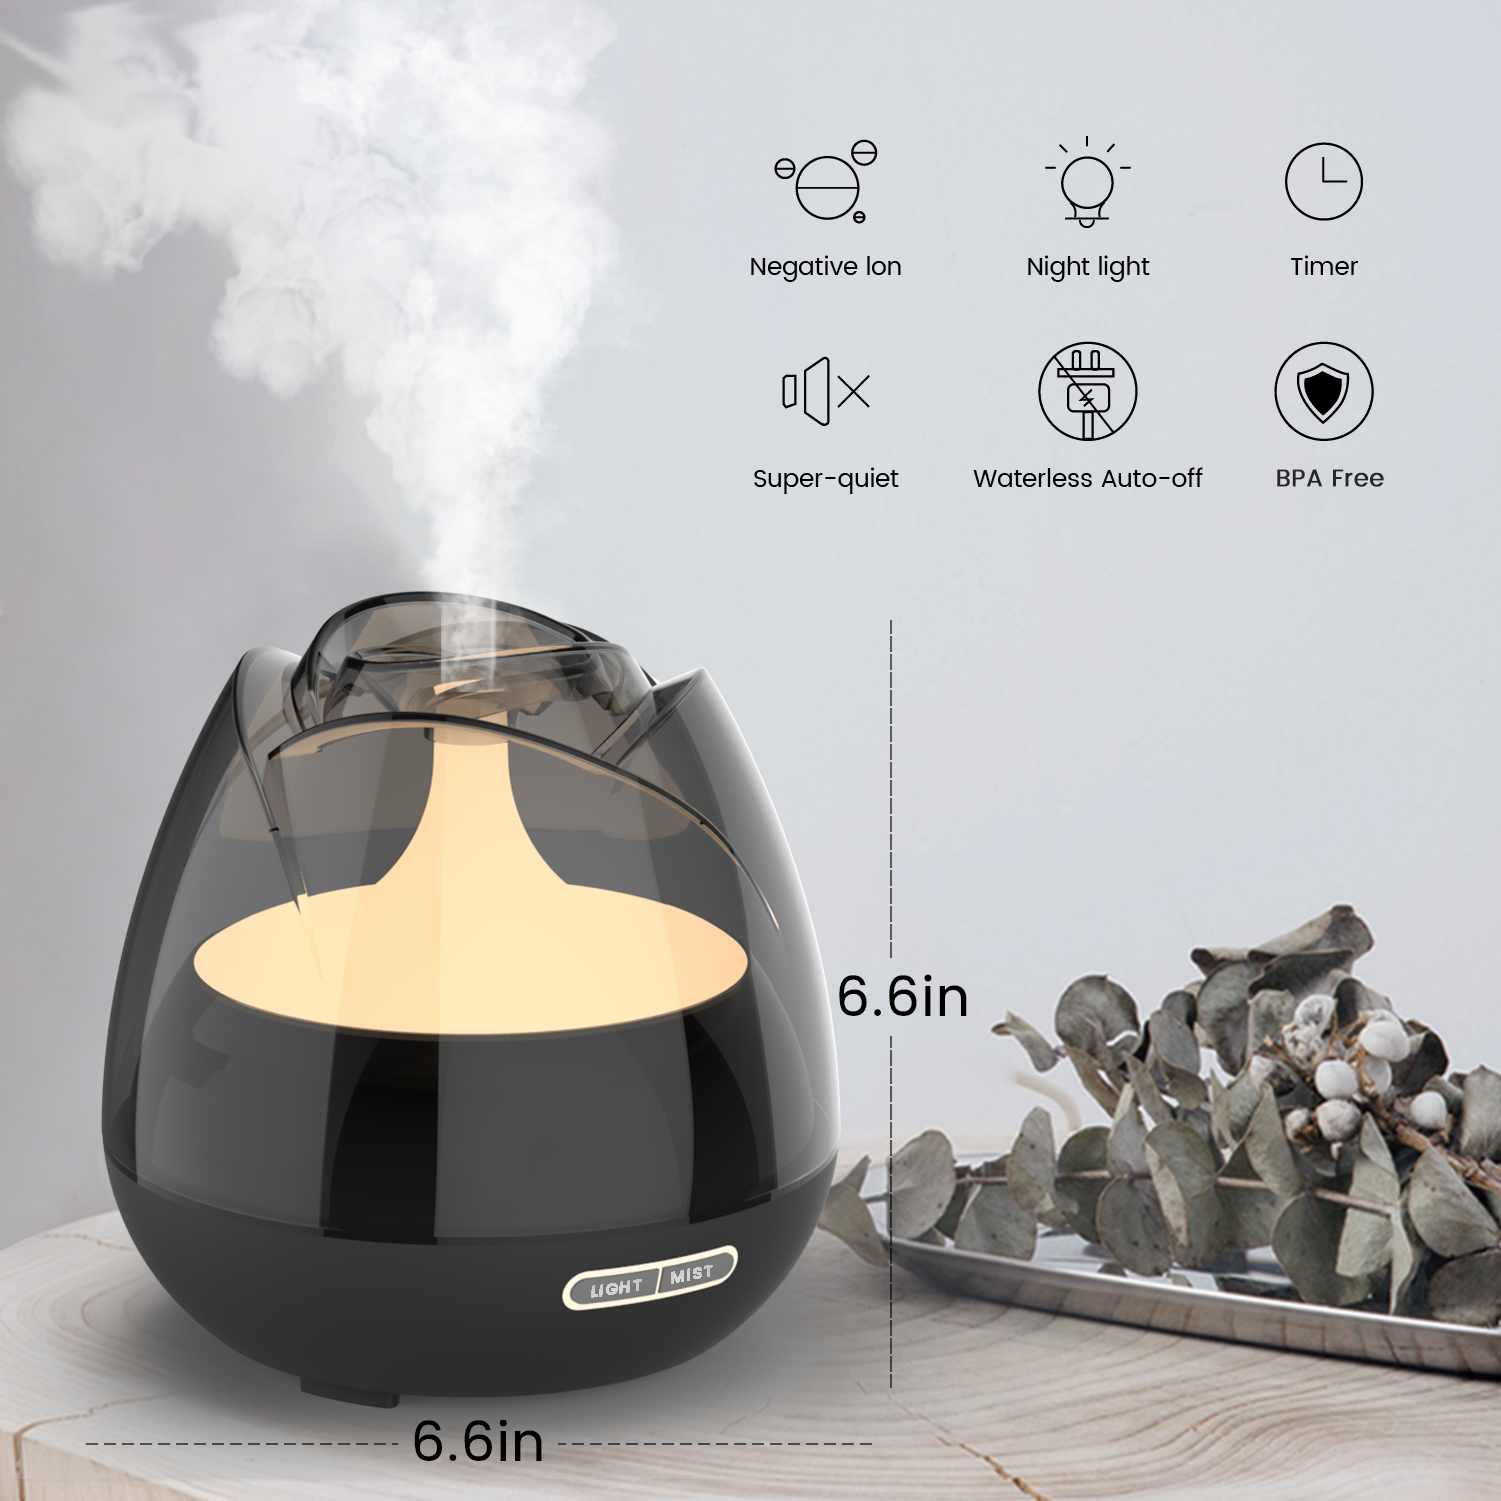 ULTRASONIC ROSE AIR HUMIDIFIER ESSENTIAL OIL DIFFUSER AIR PURIFIER AROMATHERAPY ELECTRIC AROMA DIFFUSER MIST MAKER 7 LIGHT